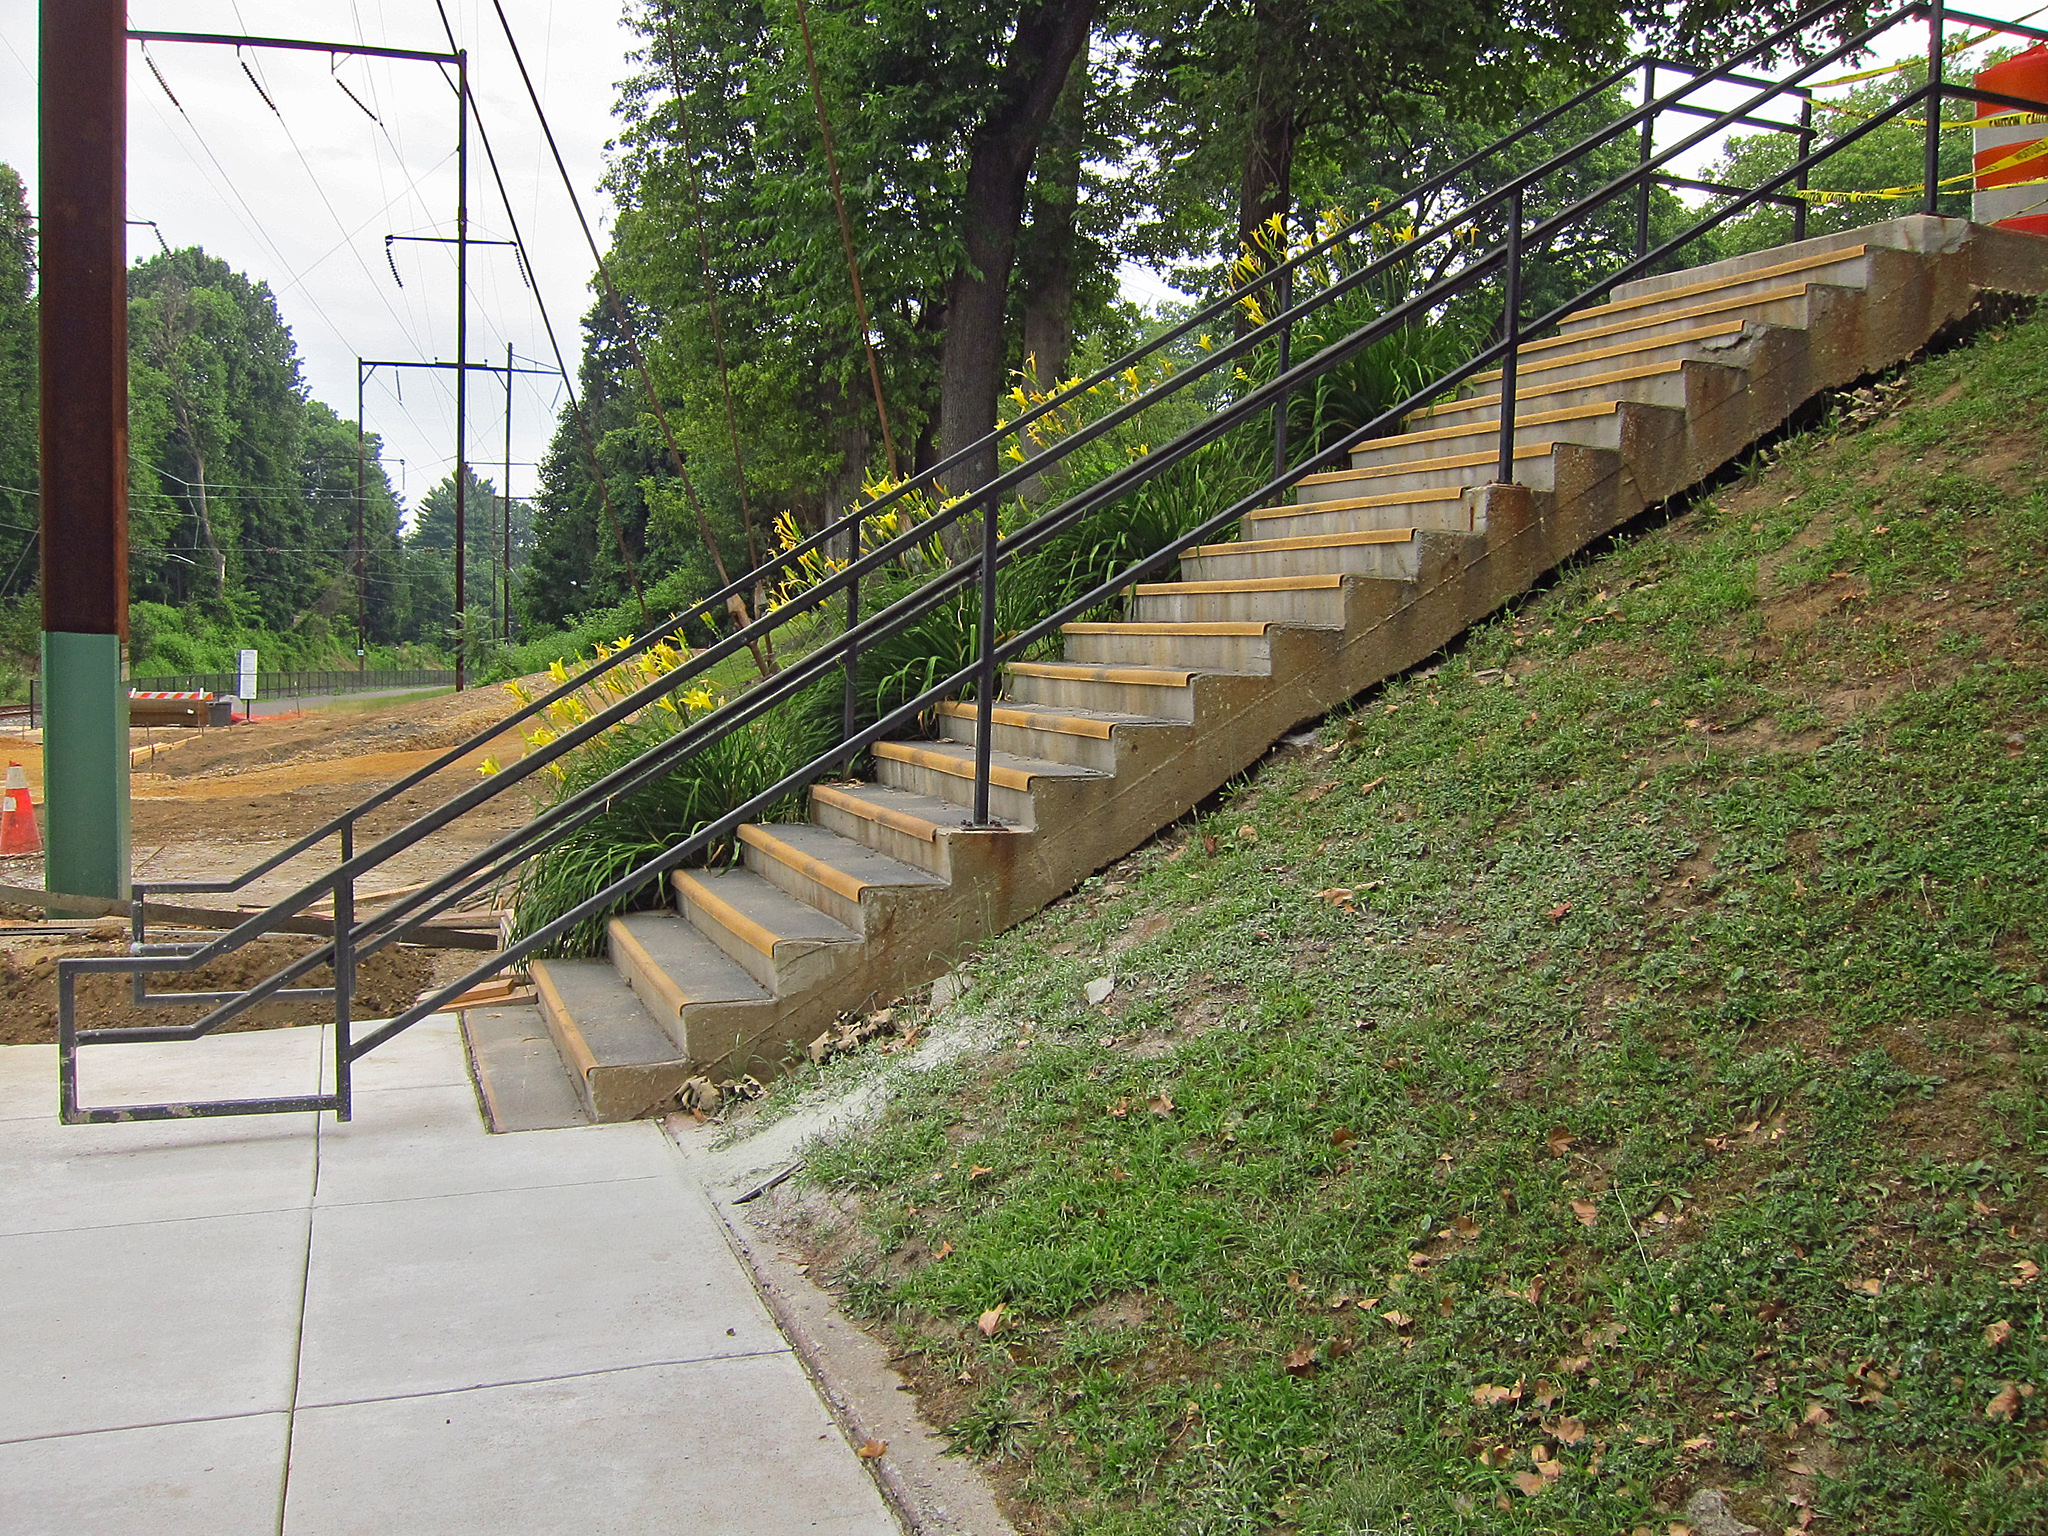 steps above platform and the old short retaining wall